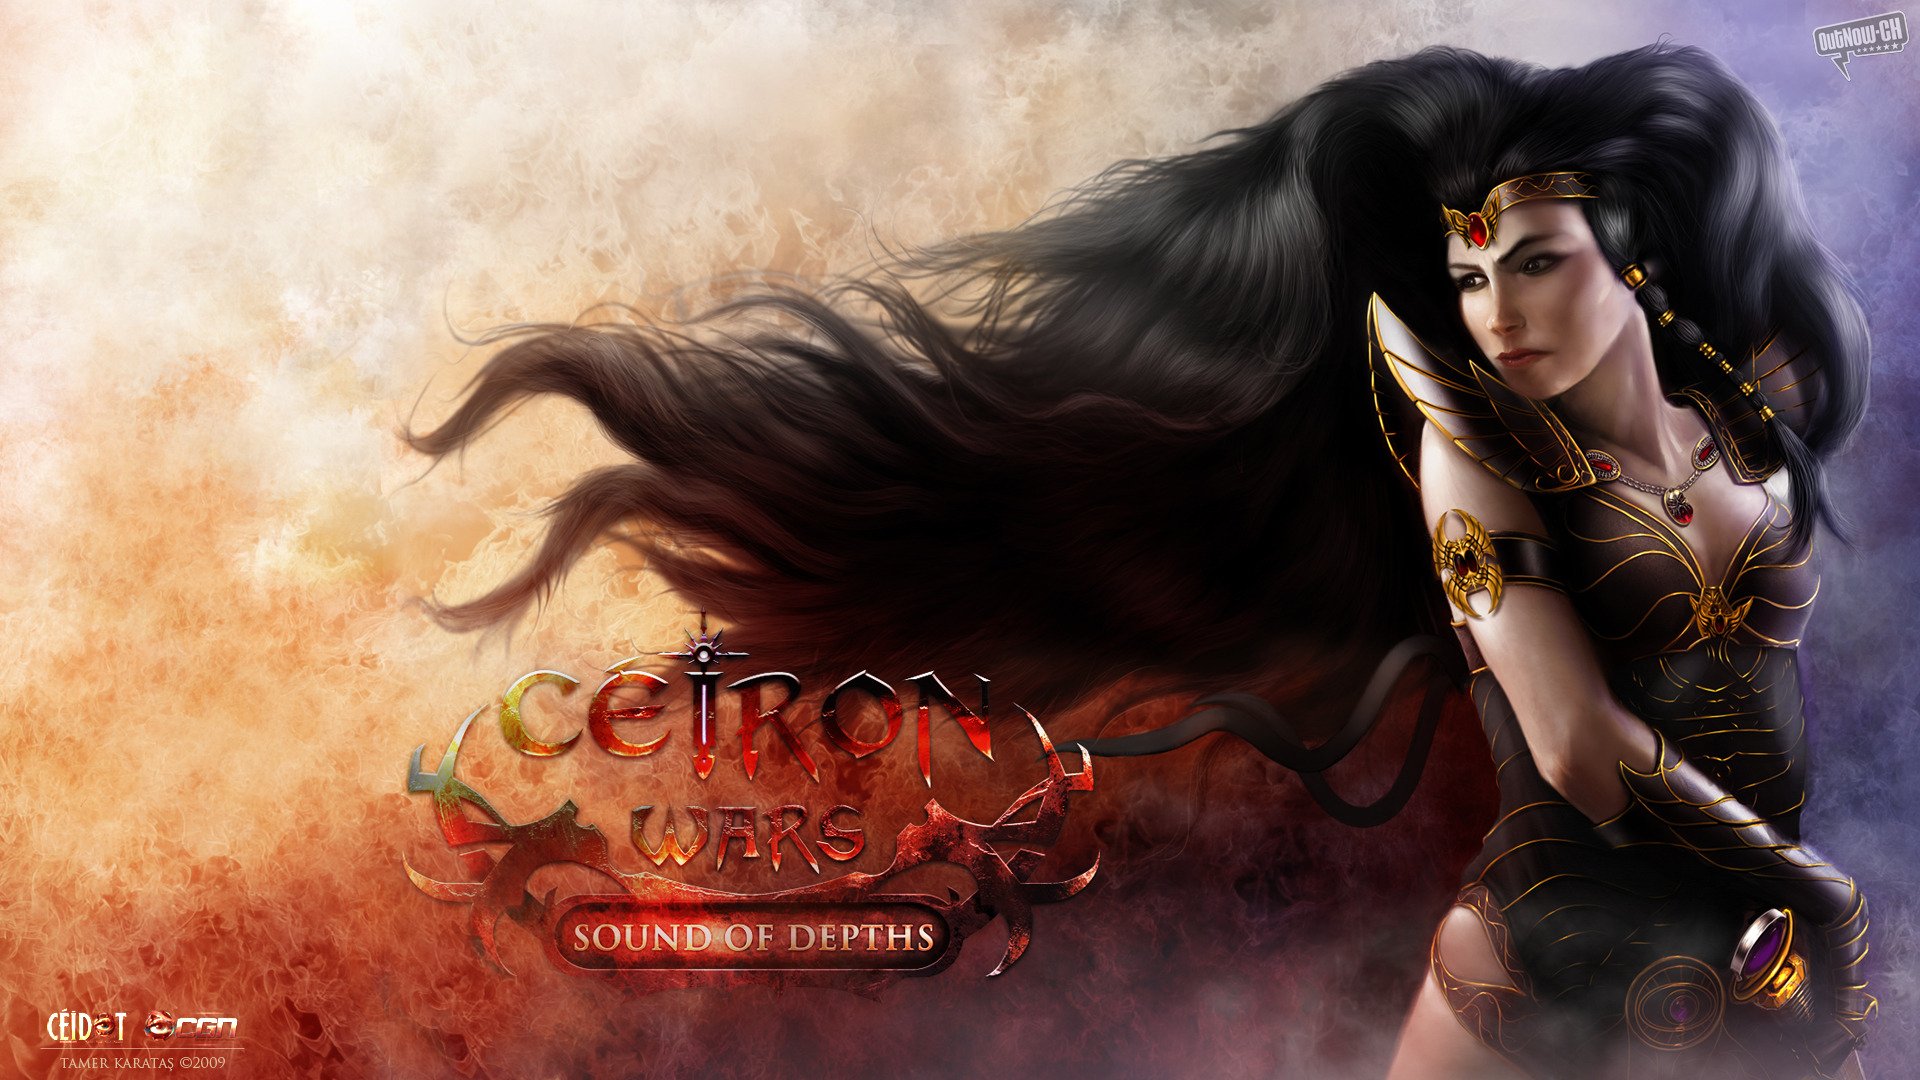 Ceiron Wars Wallpapers